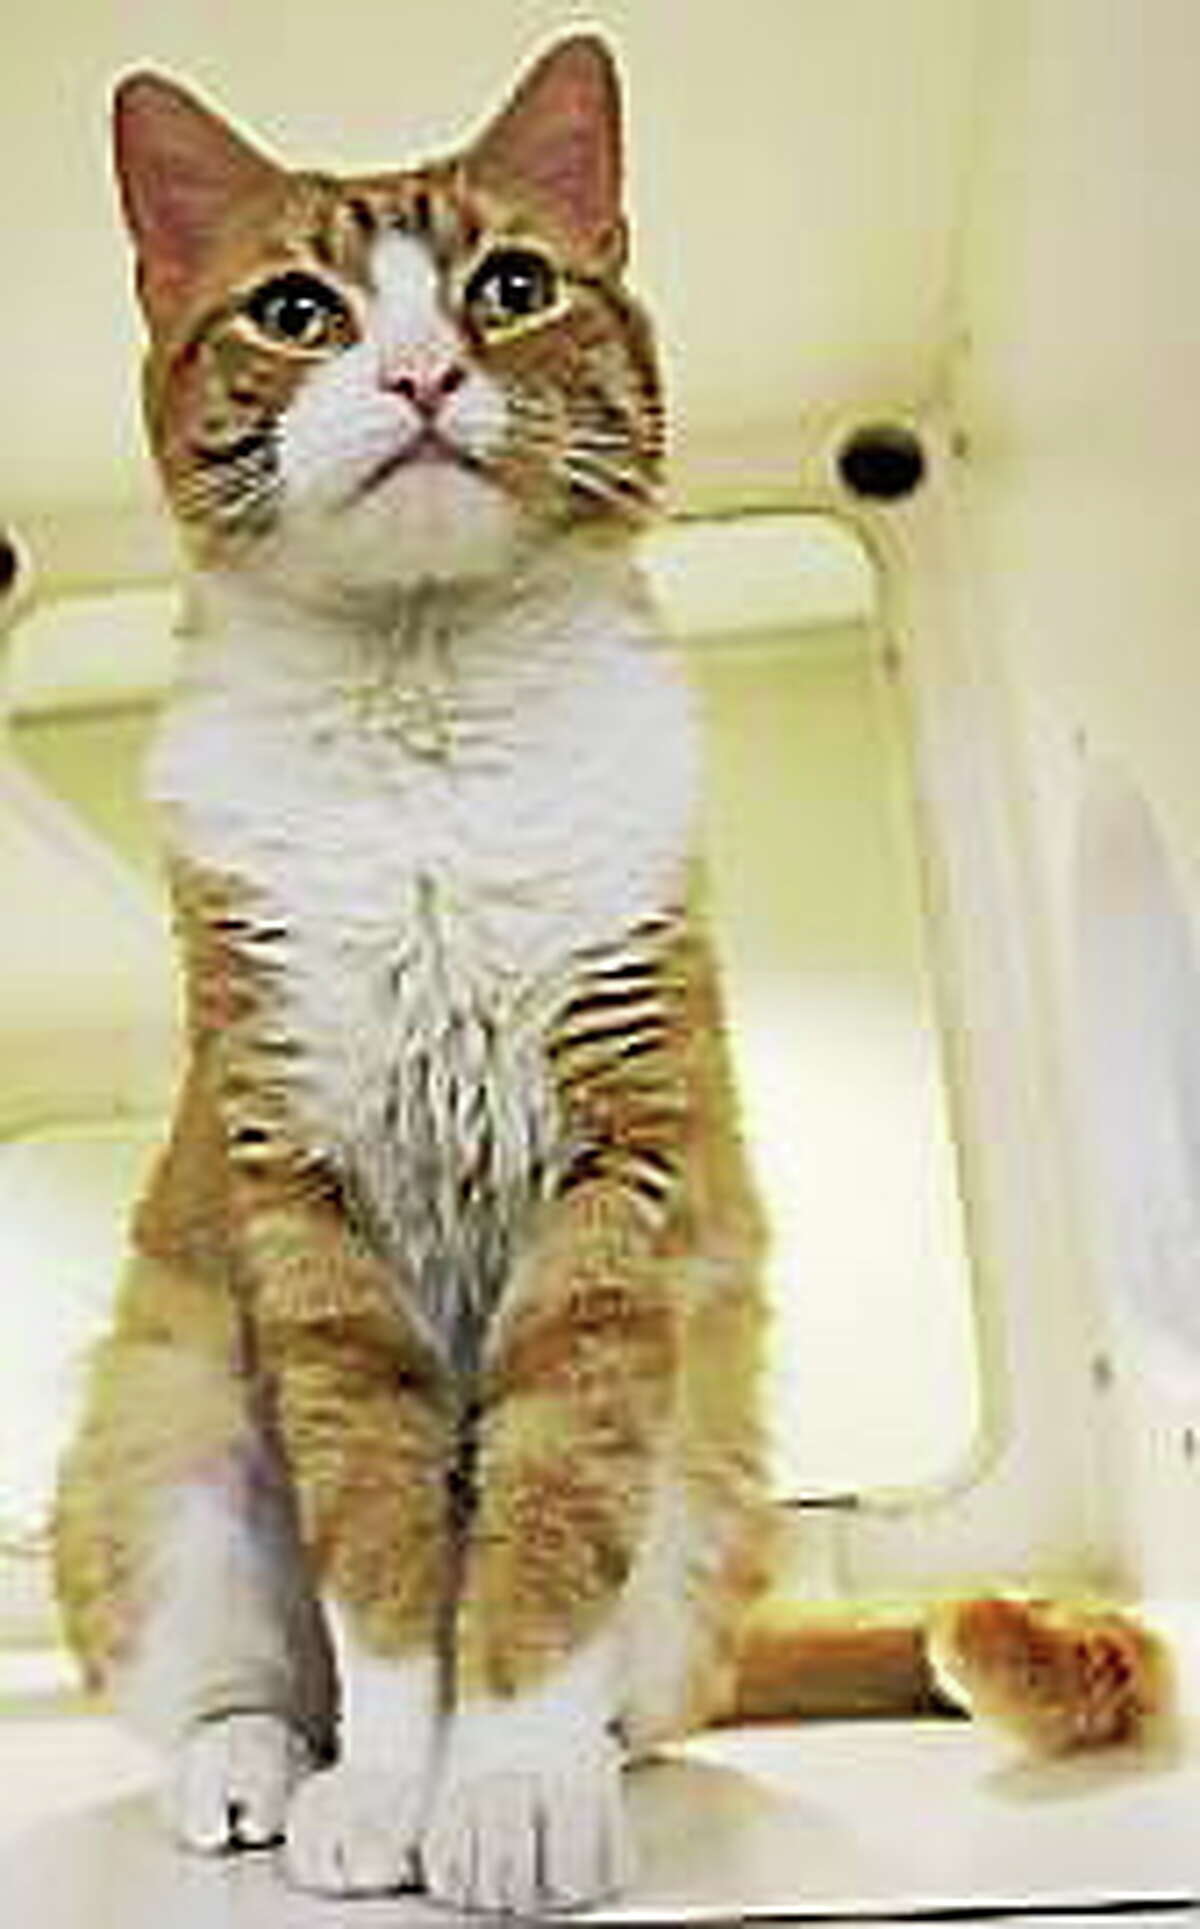 This cool cat is just waiting for his territory to strut around like Top Cat! Catarino is mature enough at 6 years old to be calm and disciplined, but still young enough to give your family years of devoted friendship. Come to the Newington shelter and see all of our furry felines - young and old, and a variety of colors and personalities. They are waiting for the right household to bring them home. Come and find your new friend. Remember, Connecticut Humane Society has no time limits for adoption. Inquiries for adoption should be made at the Connecticut Humane Society located at 701 Russell Road in Newington or by calling (860) 594-4500 or toll free at 1-800-452-0114. The Connecticut Humane Society is a private organization with branch shelters in Waterford, Westport and a cat adoption center in the PetSMART store in New London. The Connecticut Humane Society is not affiliated with any other animal welfare organizations on the national, regional or local level.